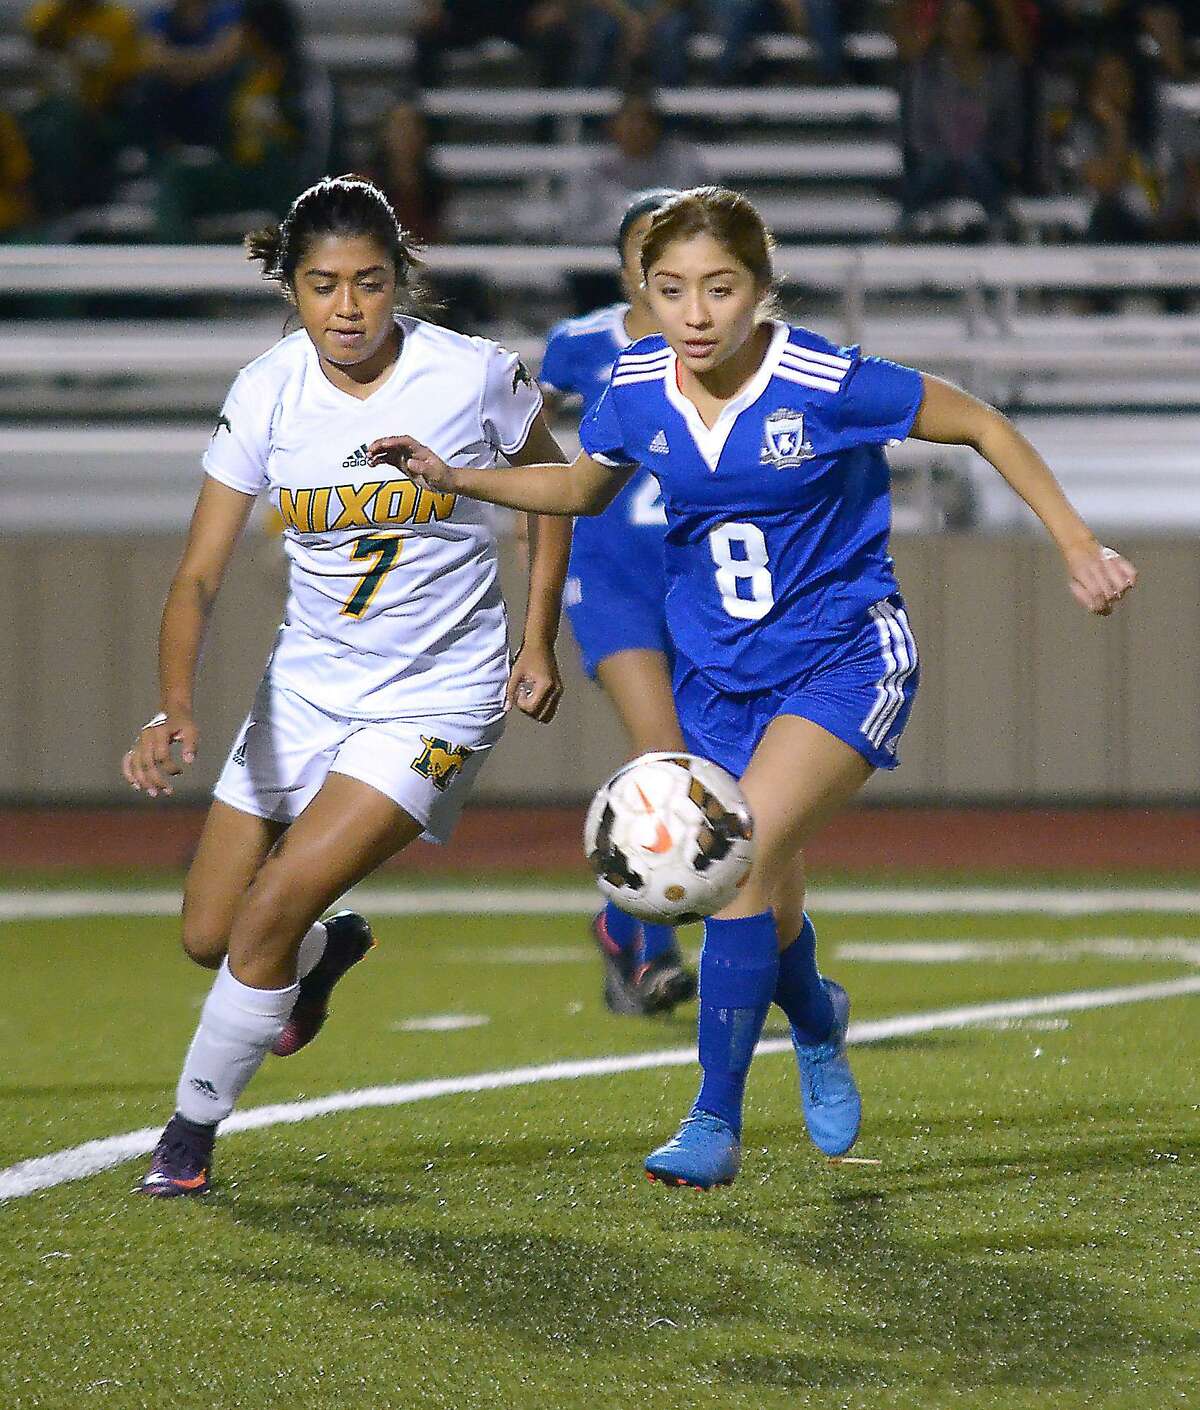 Dora Martinez scored the lone goal for the Lady Toros in their 7-1 loss to the Lady Mustangs.